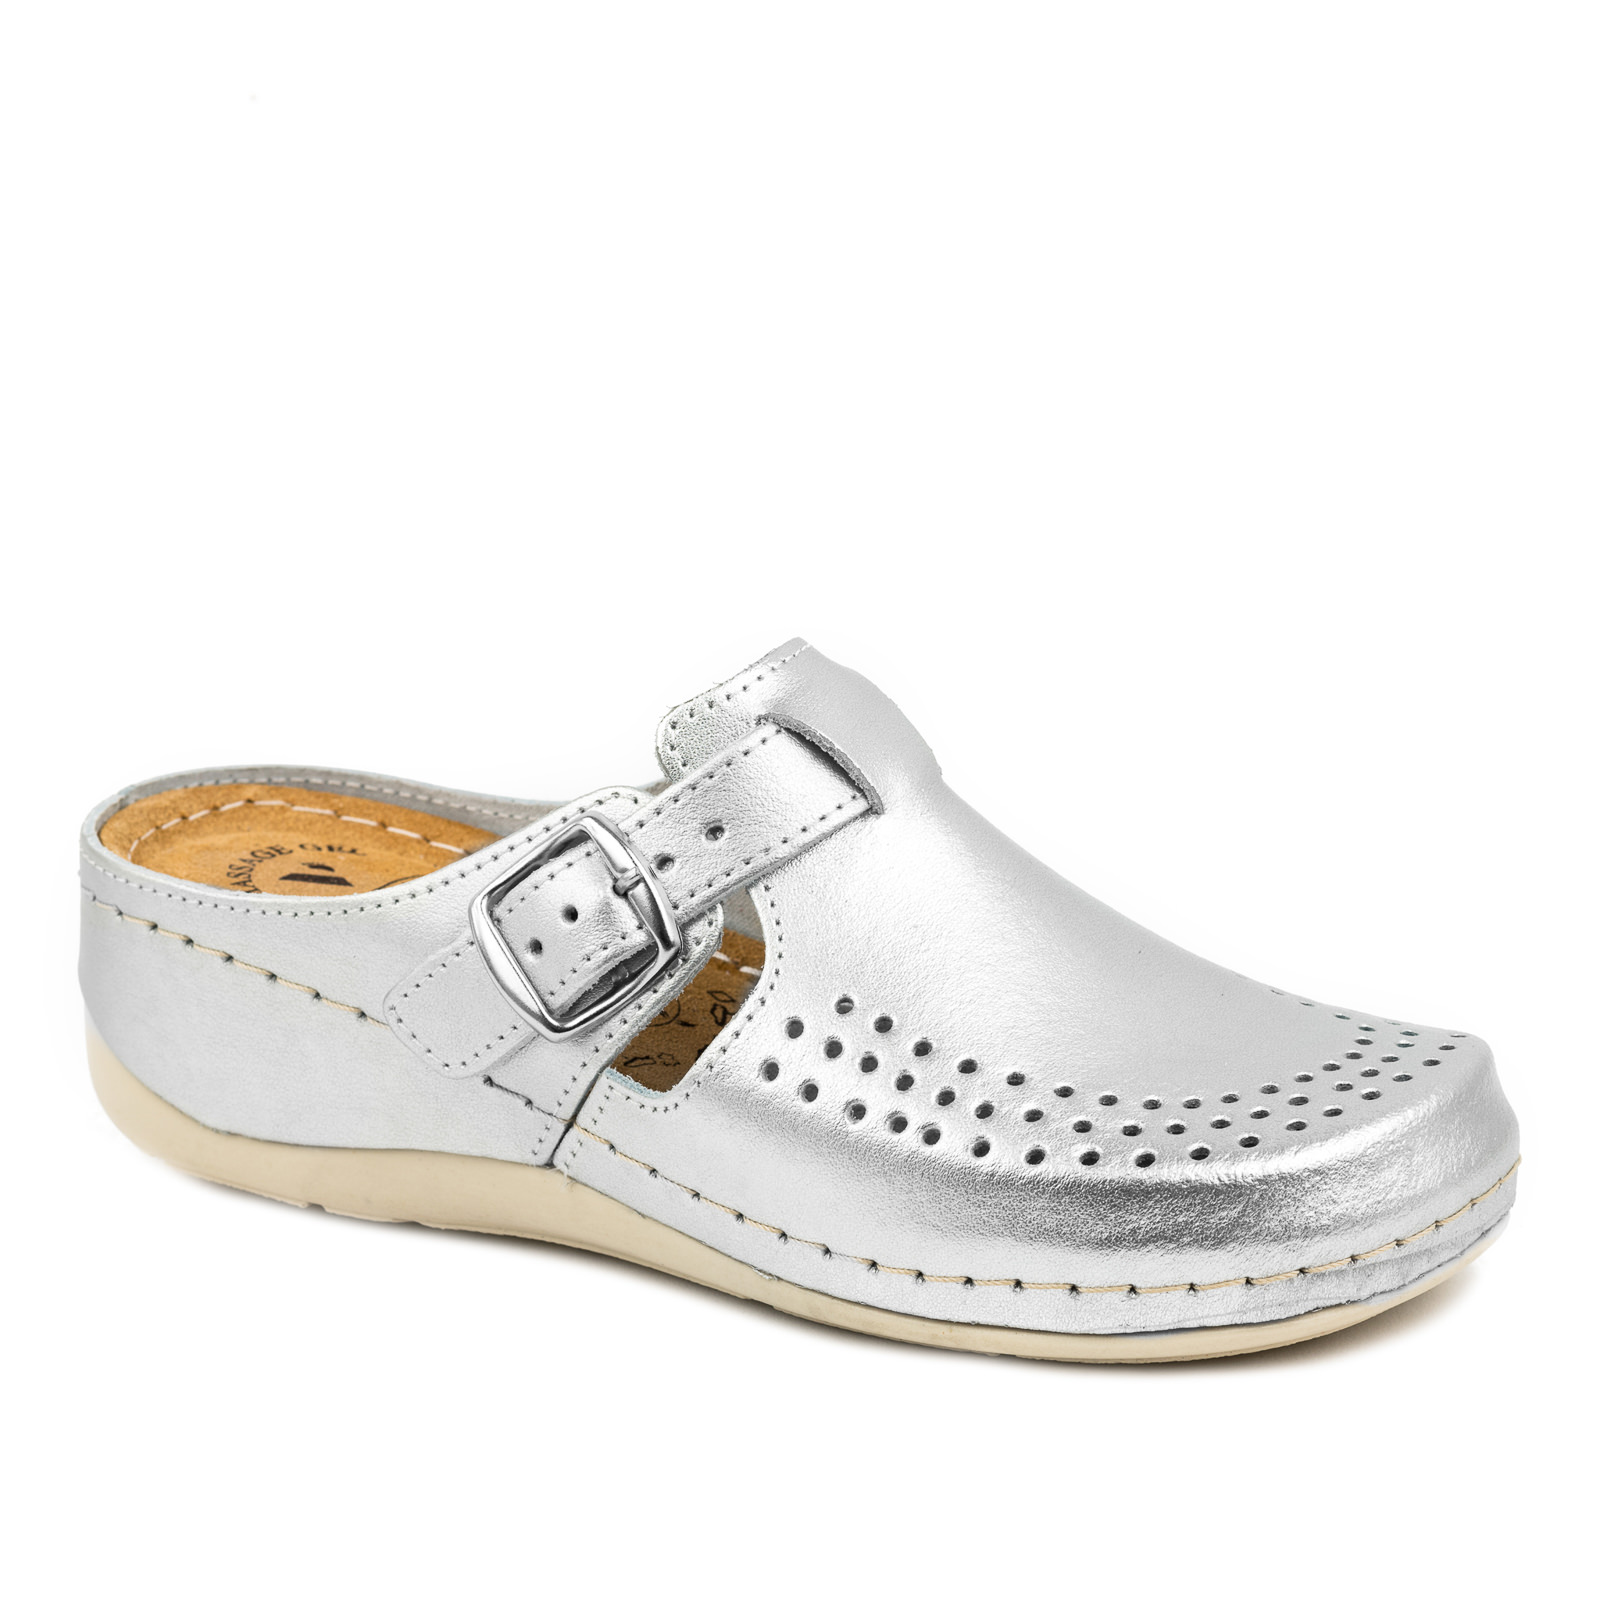 HIGH SOLE ANATOMIC LEATHER CLOGS  - SILVER